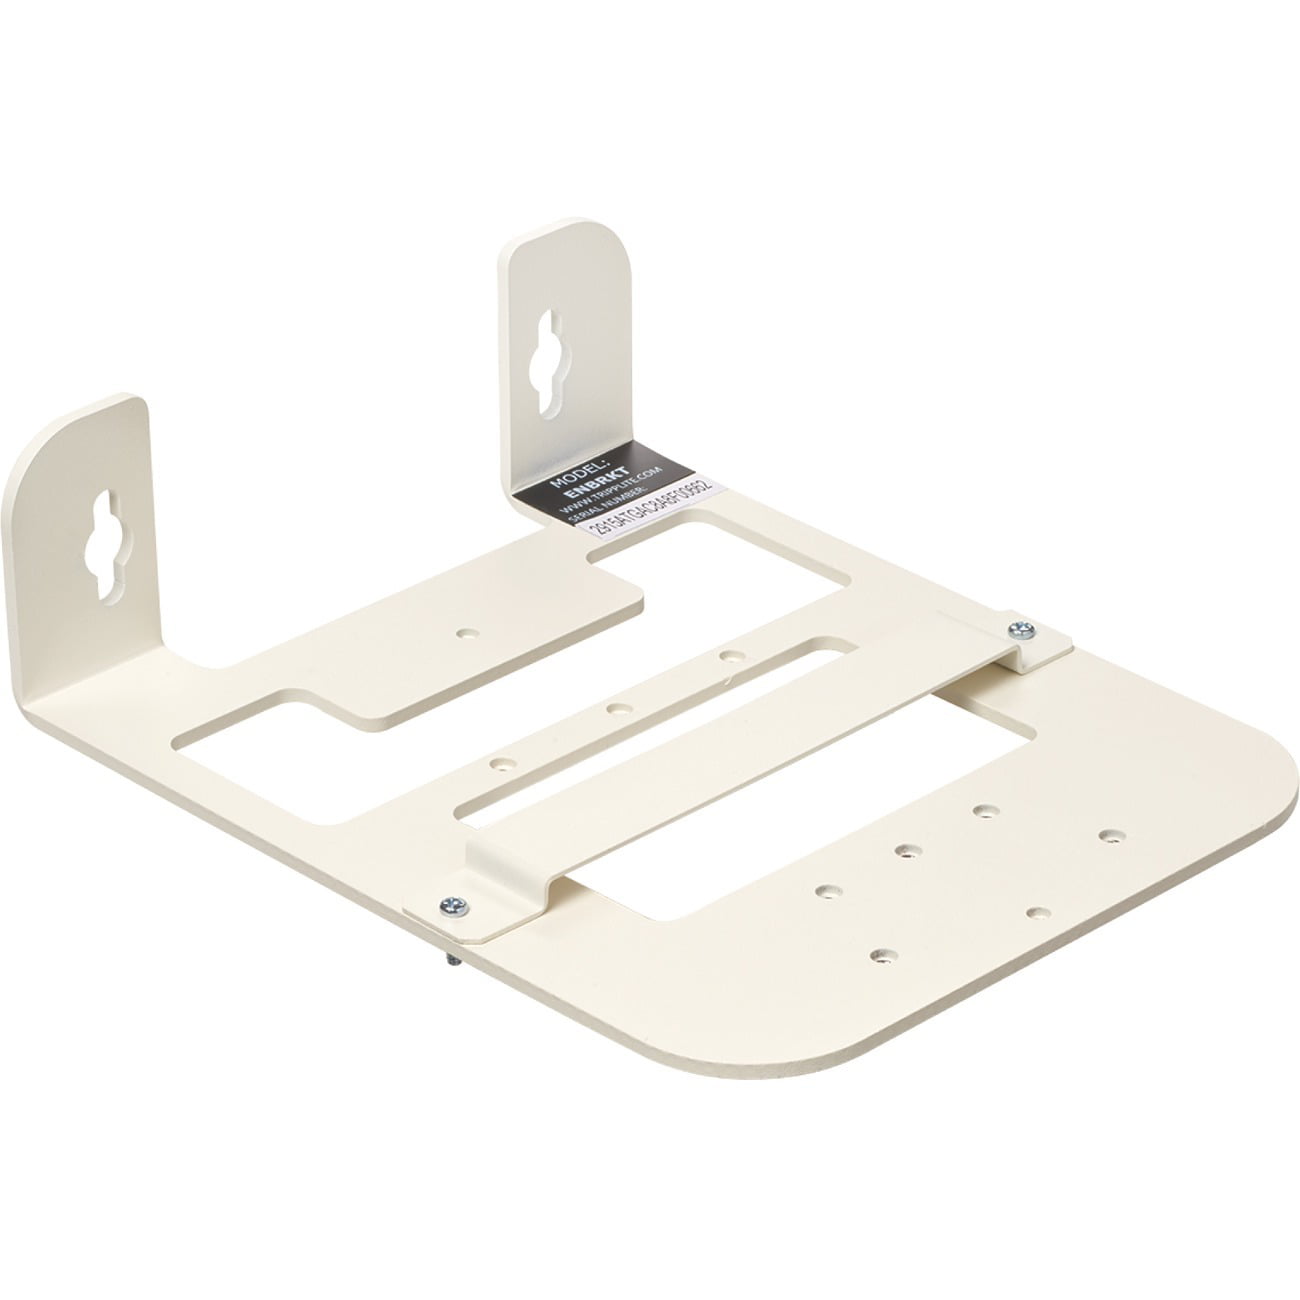 Universal Wall Bracket for Wireless Access Point Right Angle, Steel, White